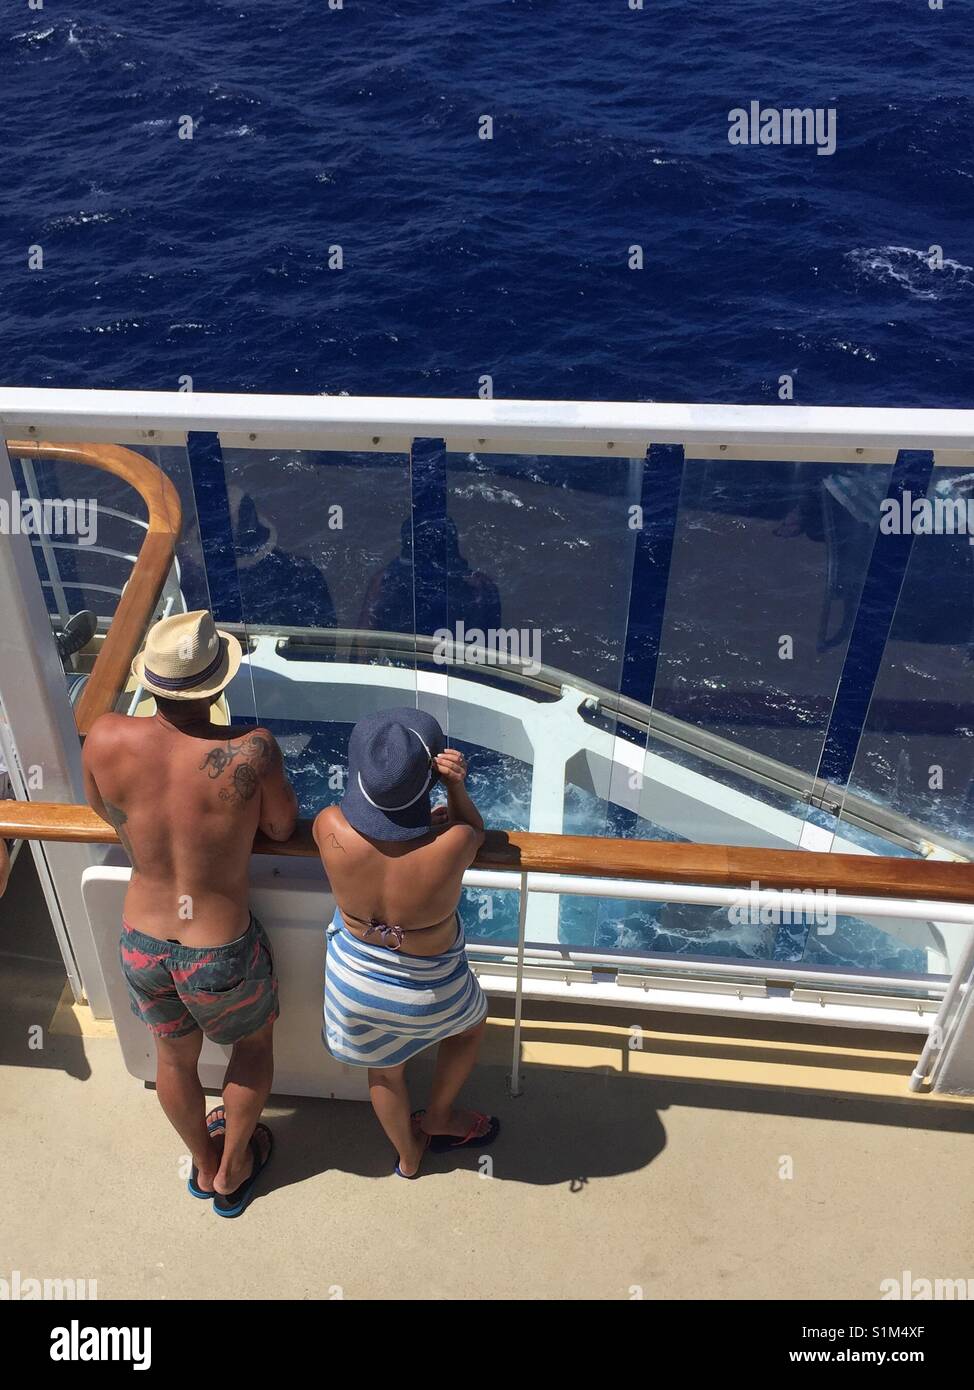 Couple in 20-30s on cruise ship deck wearing swim suits and hats enjoying the view as ship departs port. Looking down In man and woman lean on deck railing of cruise line. Tropical voyage Stock Photo